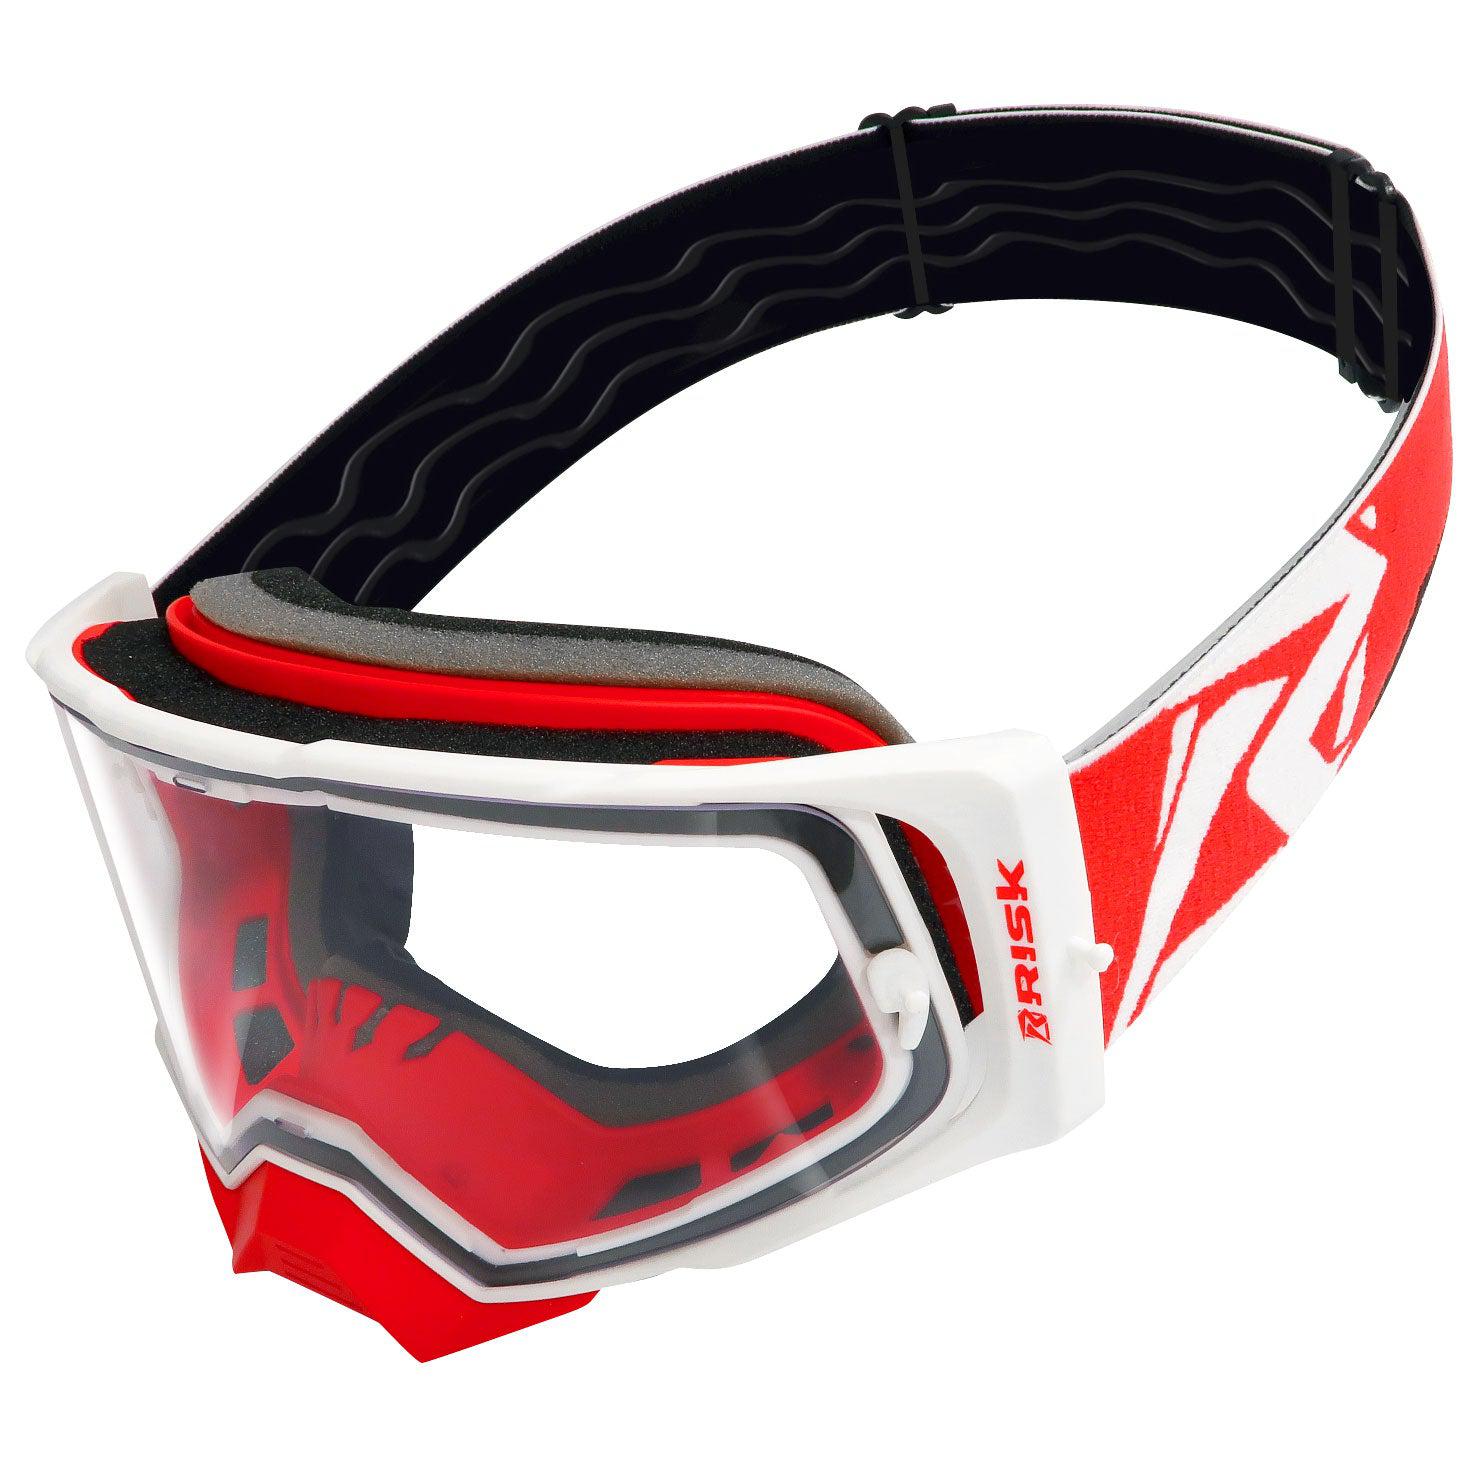 both color options of the J.A.C. V2 Goggles by Risk Racing. black/red & white/red